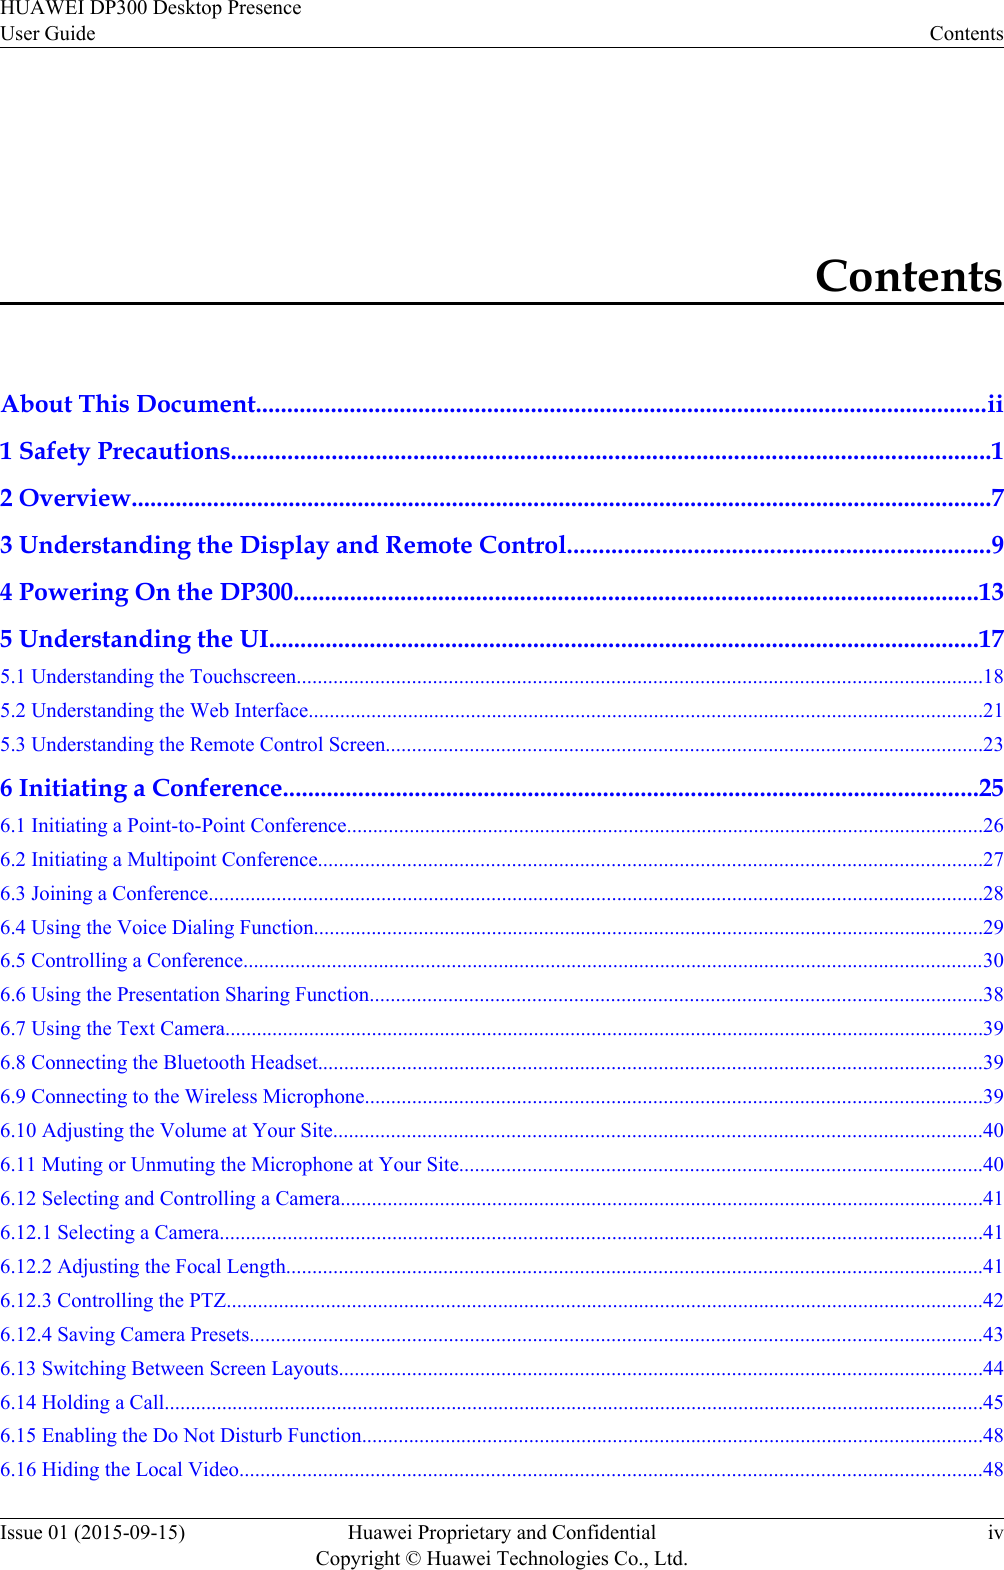 ContentsAbout This Document.....................................................................................................................ii1 Safety Precautions.........................................................................................................................12 Overview.........................................................................................................................................73 Understanding the Display and Remote Control...................................................................94 Powering On the DP300.............................................................................................................135 Understanding the UI.................................................................................................................175.1 Understanding the Touchscreen...................................................................................................................................185.2 Understanding the Web Interface.................................................................................................................................215.3 Understanding the Remote Control Screen..................................................................................................................236 Initiating a Conference...............................................................................................................256.1 Initiating a Point-to-Point Conference..........................................................................................................................266.2 Initiating a Multipoint Conference...............................................................................................................................276.3 Joining a Conference....................................................................................................................................................286.4 Using the Voice Dialing Function................................................................................................................................296.5 Controlling a Conference..............................................................................................................................................306.6 Using the Presentation Sharing Function.....................................................................................................................386.7 Using the Text Camera.................................................................................................................................................396.8 Connecting the Bluetooth Headset...............................................................................................................................396.9 Connecting to the Wireless Microphone......................................................................................................................396.10 Adjusting the Volume at Your Site............................................................................................................................406.11 Muting or Unmuting the Microphone at Your Site....................................................................................................406.12 Selecting and Controlling a Camera...........................................................................................................................416.12.1 Selecting a Camera..................................................................................................................................................416.12.2 Adjusting the Focal Length.....................................................................................................................................416.12.3 Controlling the PTZ.................................................................................................................................................426.12.4 Saving Camera Presets............................................................................................................................................436.13 Switching Between Screen Layouts...........................................................................................................................446.14 Holding a Call.............................................................................................................................................................456.15 Enabling the Do Not Disturb Function.......................................................................................................................486.16 Hiding the Local Video..............................................................................................................................................48HUAWEI DP300 Desktop PresenceUser Guide ContentsIssue 01 (2015-09-15) Huawei Proprietary and ConfidentialCopyright © Huawei Technologies Co., Ltd.iv